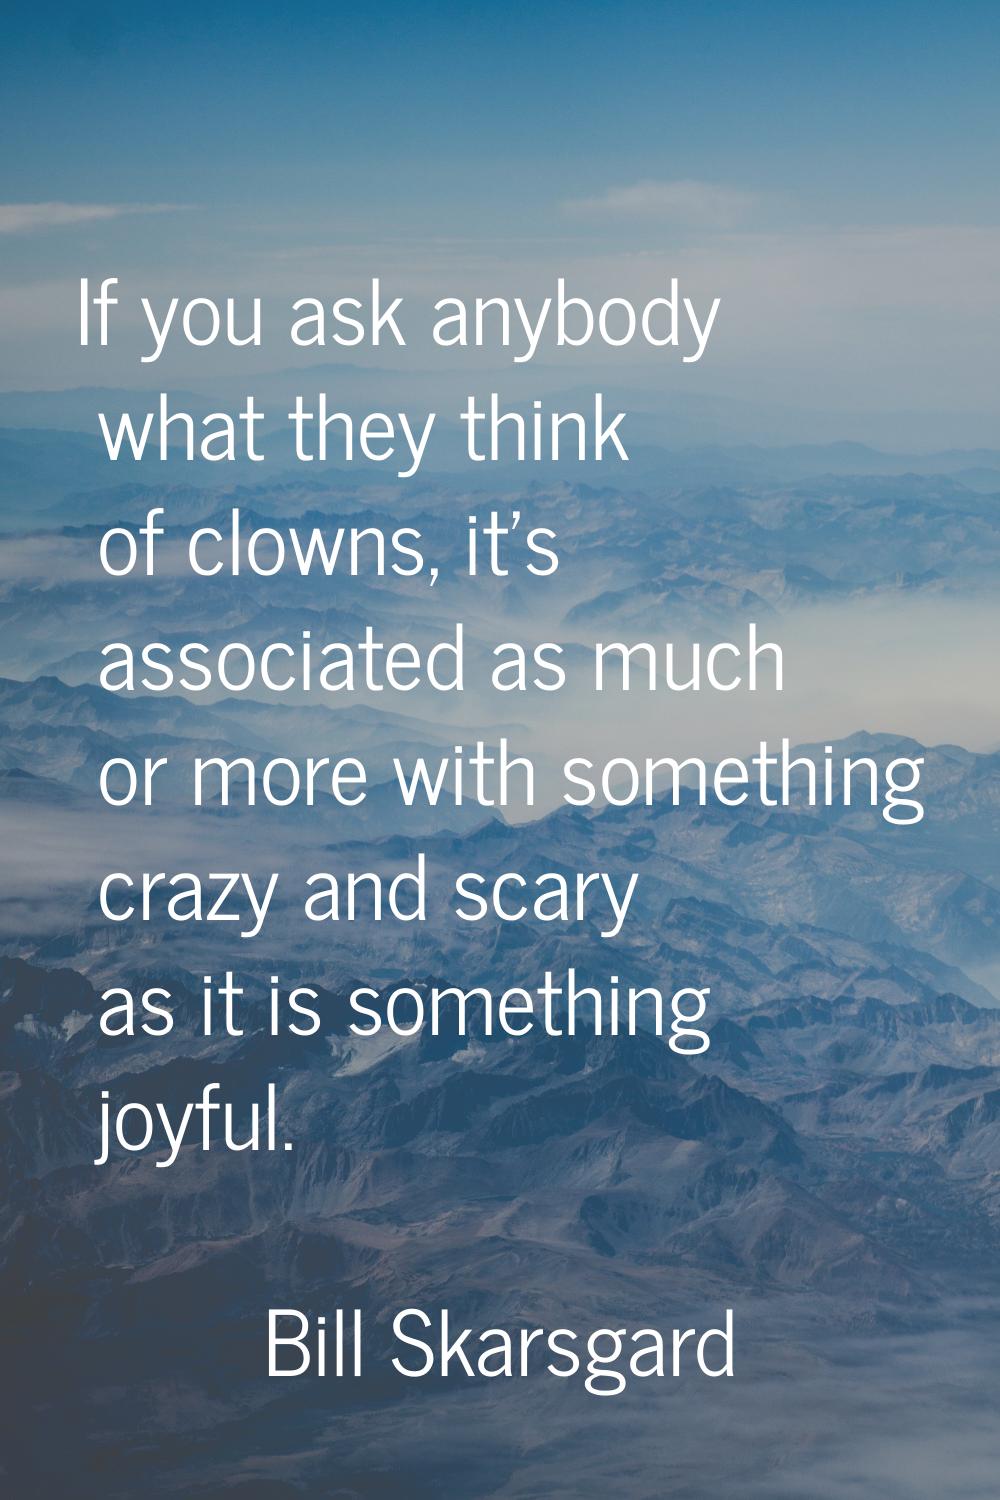 If you ask anybody what they think of clowns, it's associated as much or more with something crazy 